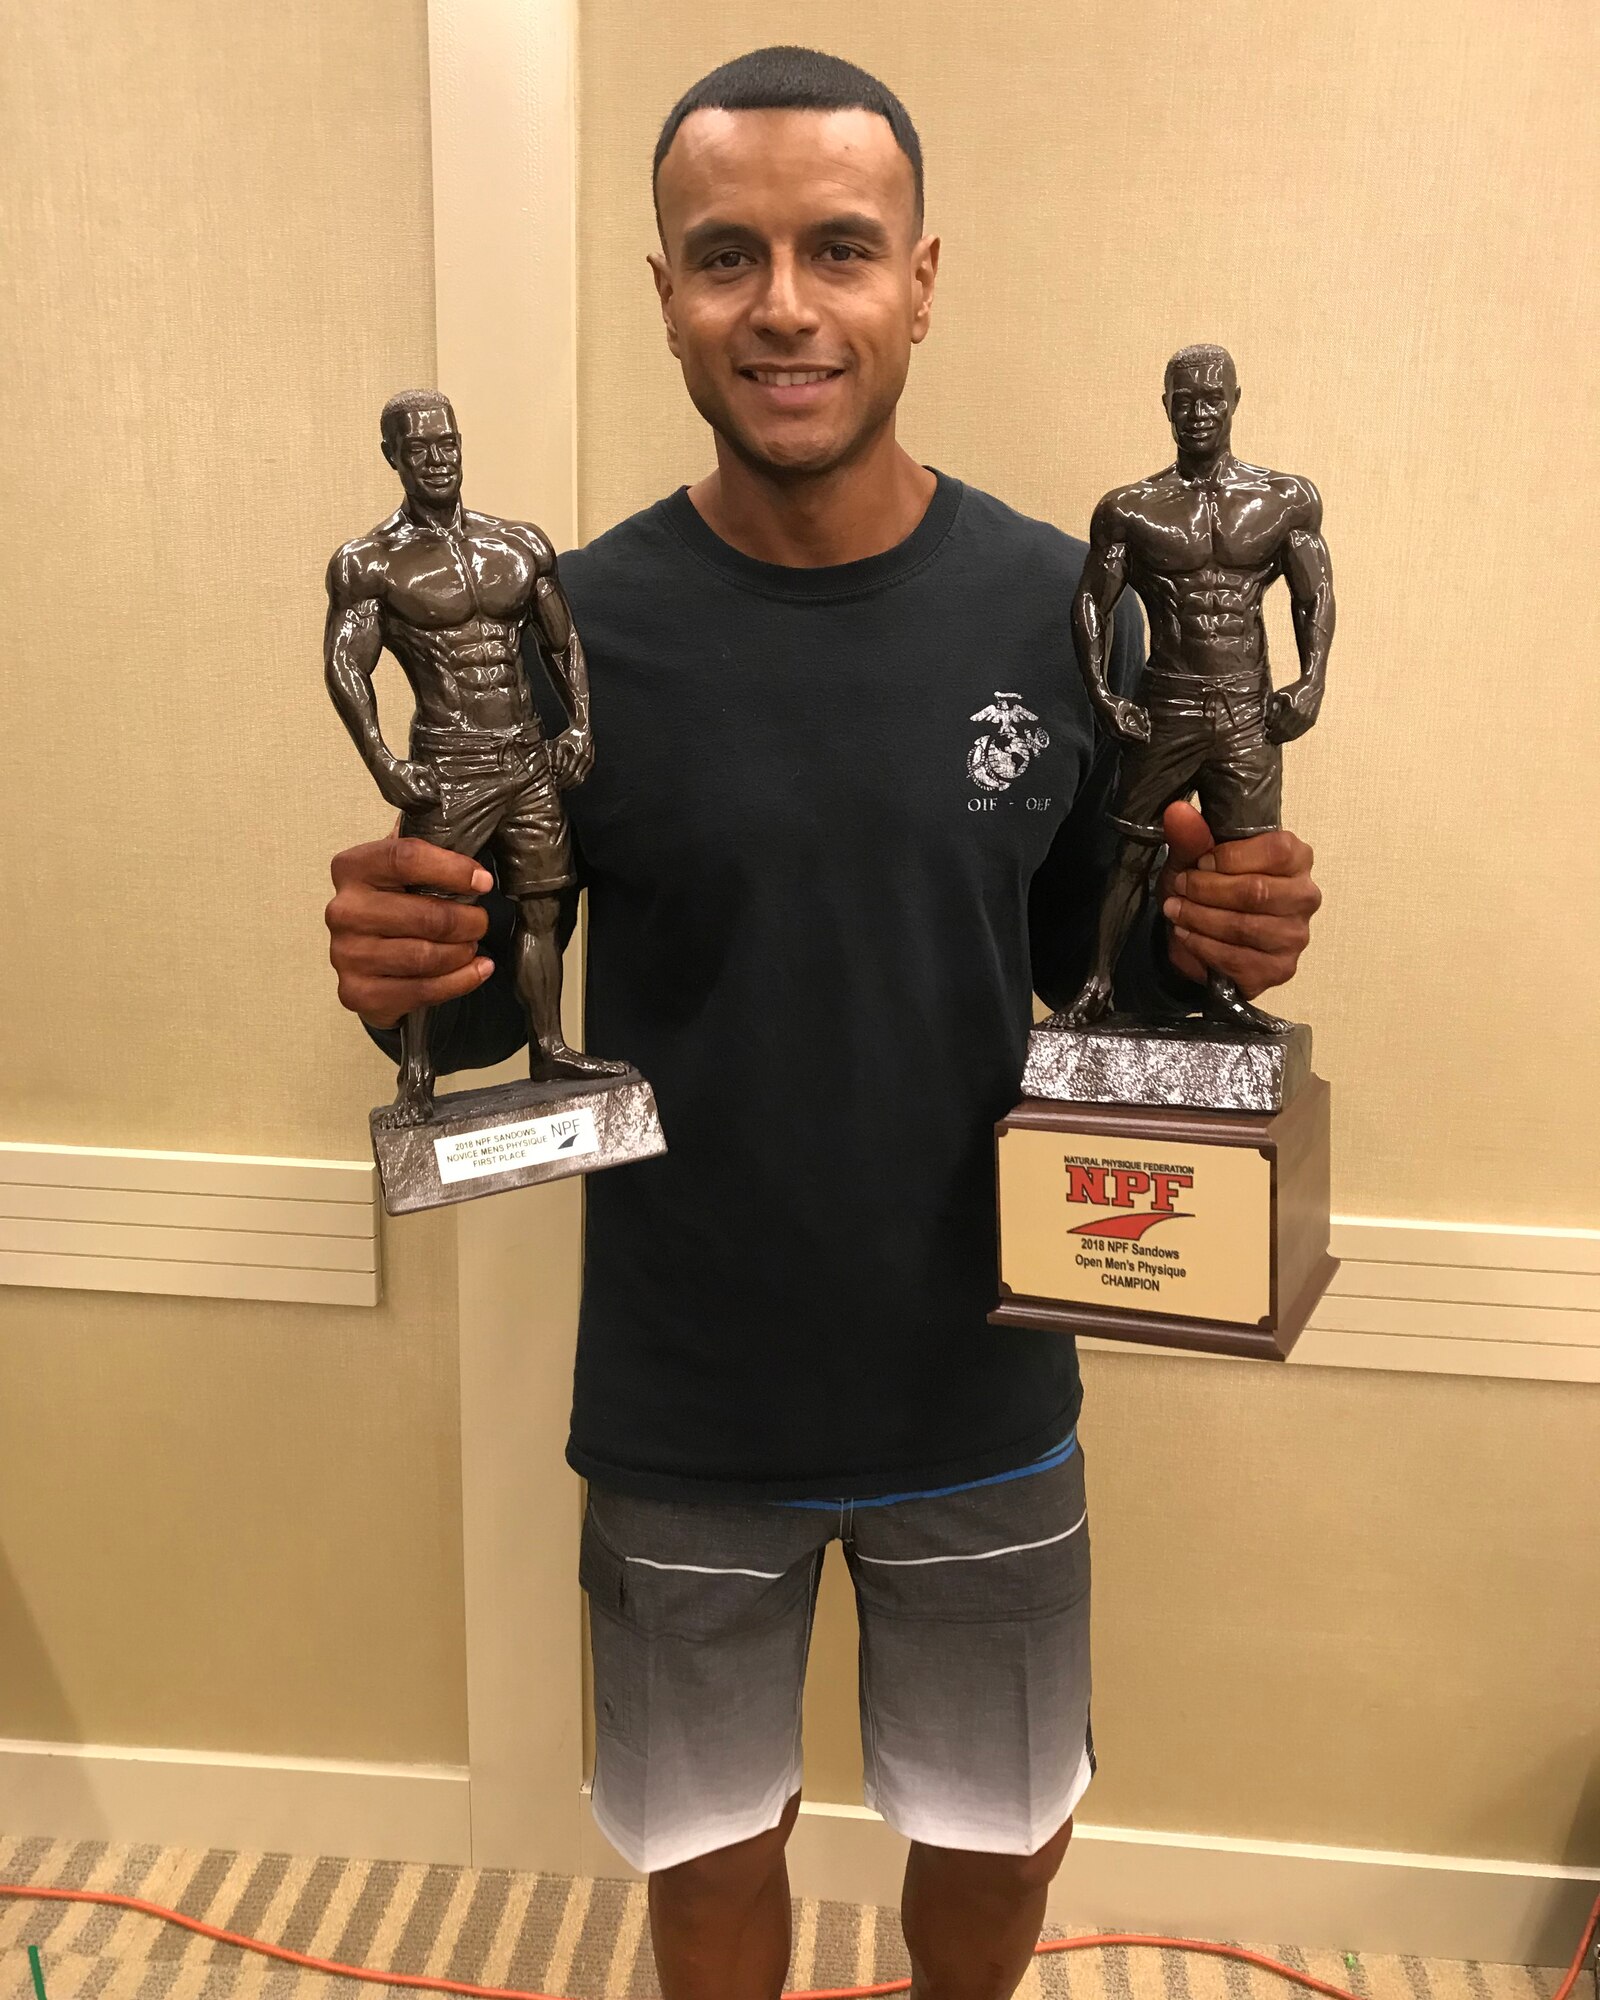 Master Sgt. Jonathan Nossa, an Airman assigned to the 178th Wing, poses with his first place trophies Nov. 17 at the Greater Columbus Convention Center in Columbus, Ohio. Nossa competed in the 2018 NPF Sandows Natural World Championship and won first place in novice men’s physique and open men’s physique.